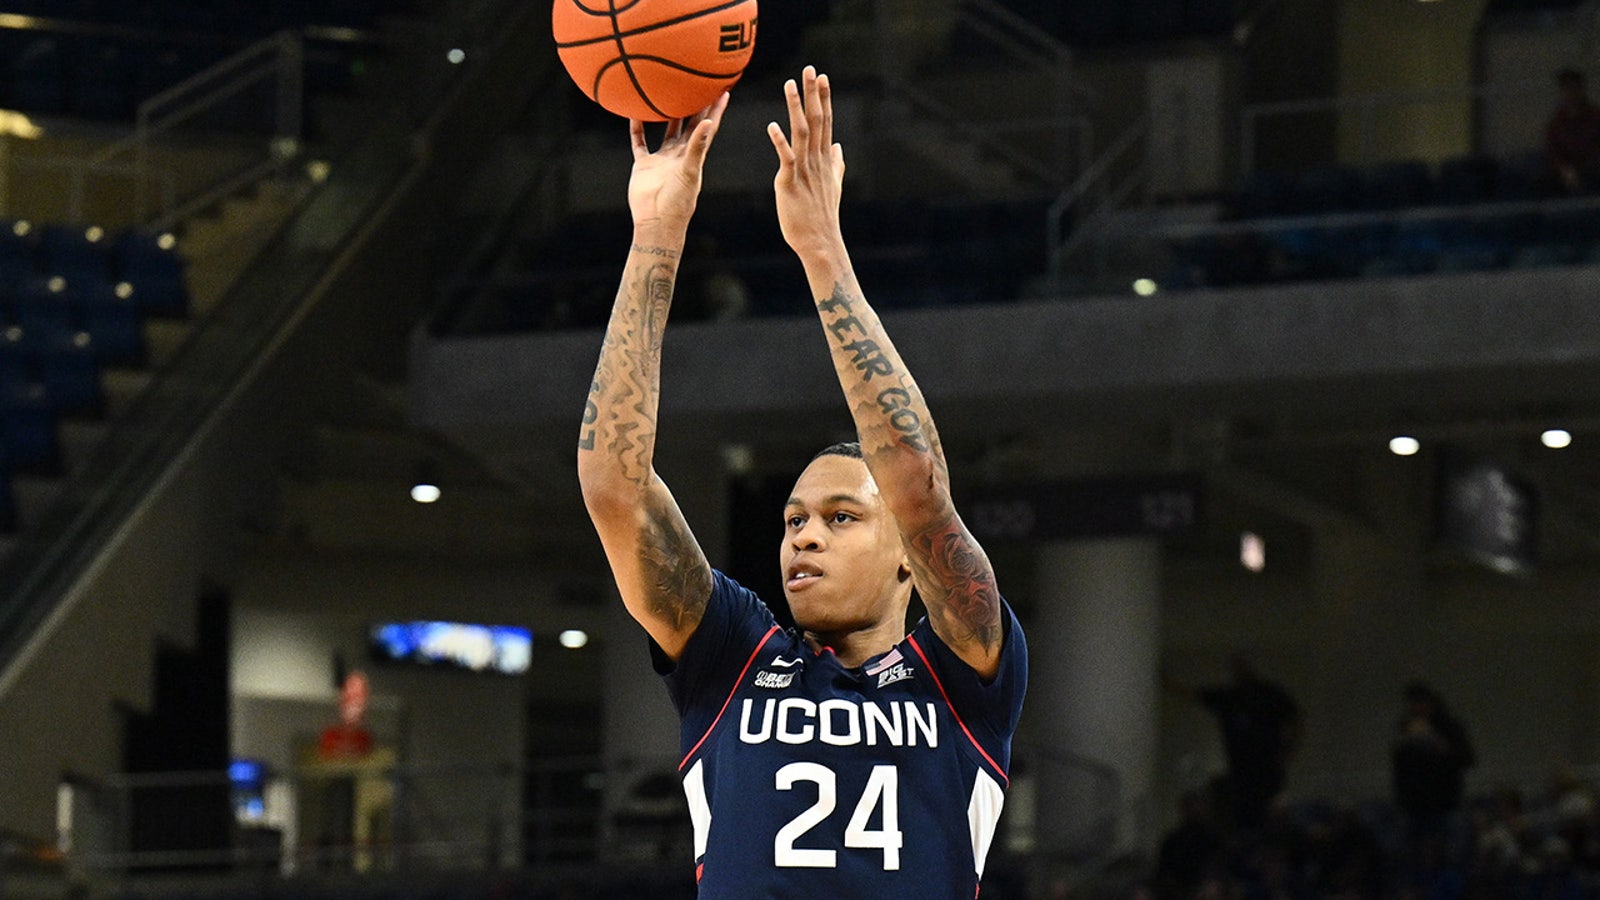 UConn ends regular season with fifth straight win